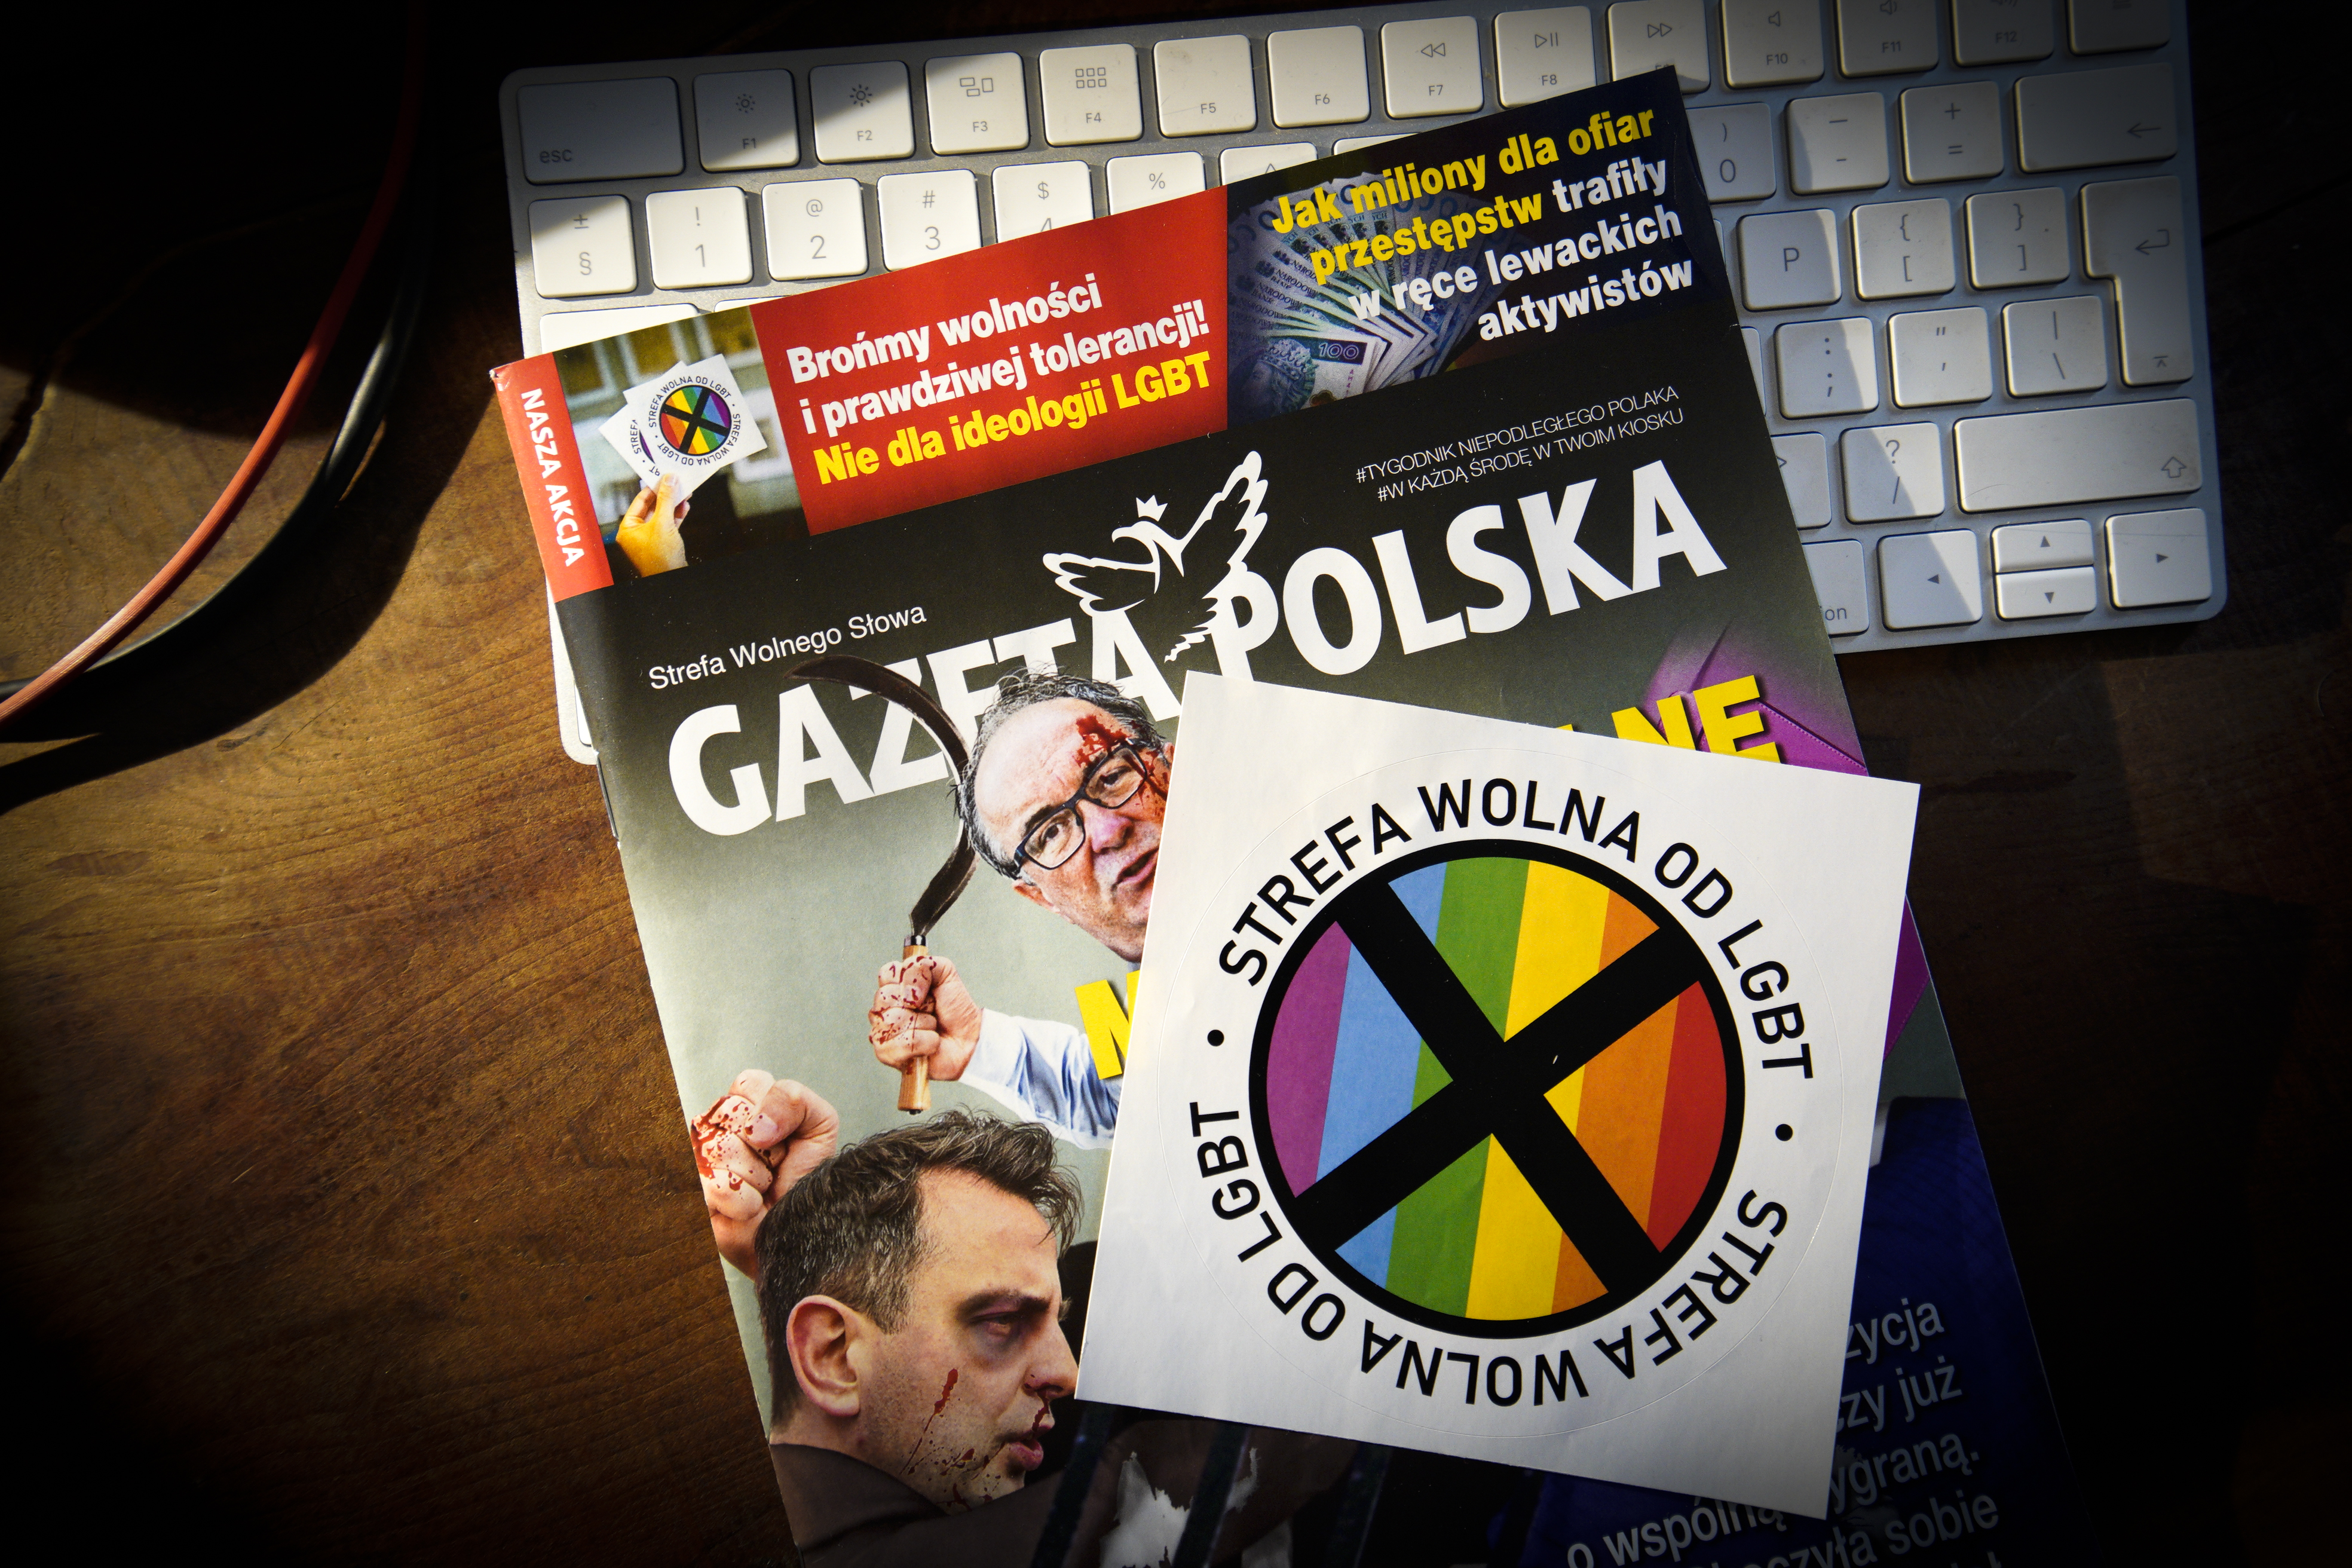 The conservative Polish Gazeta Polska magazine is including 'LGBT-free zone' stickers inside its weekly edition amid rising tensions between LGBT activists and a conservative Christian movement supported by the country's right-wing ruling party.